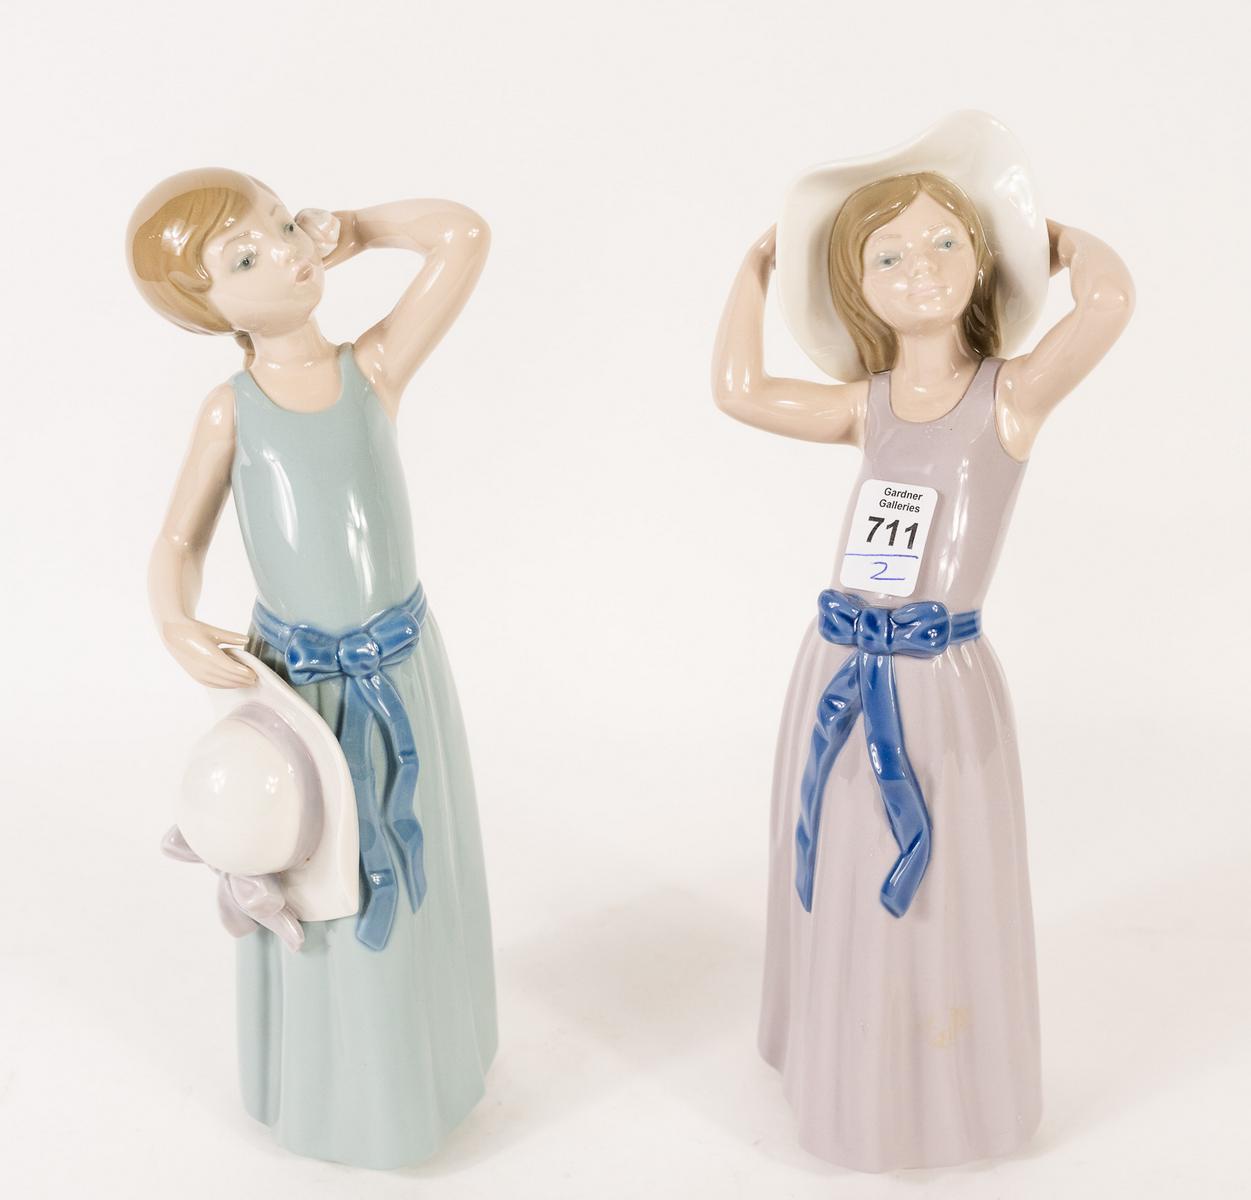 TWO LLADRO "GIRL WITH HAT" FIGURINES